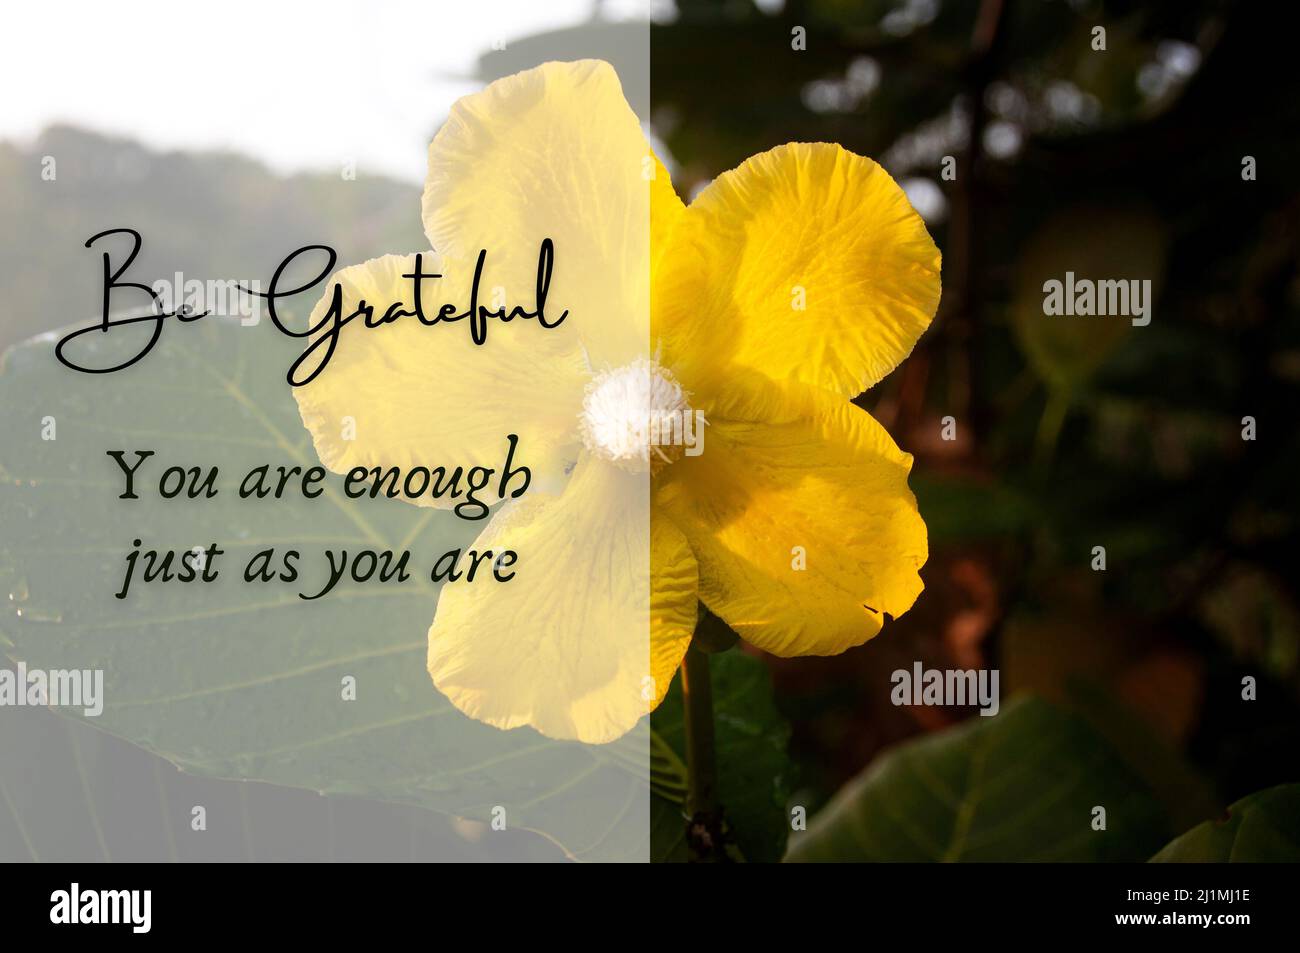 Motivational and inpirational quote - You are enough just as you are. With yellow flower and blurred nature background. Motivational concept Stock Photo